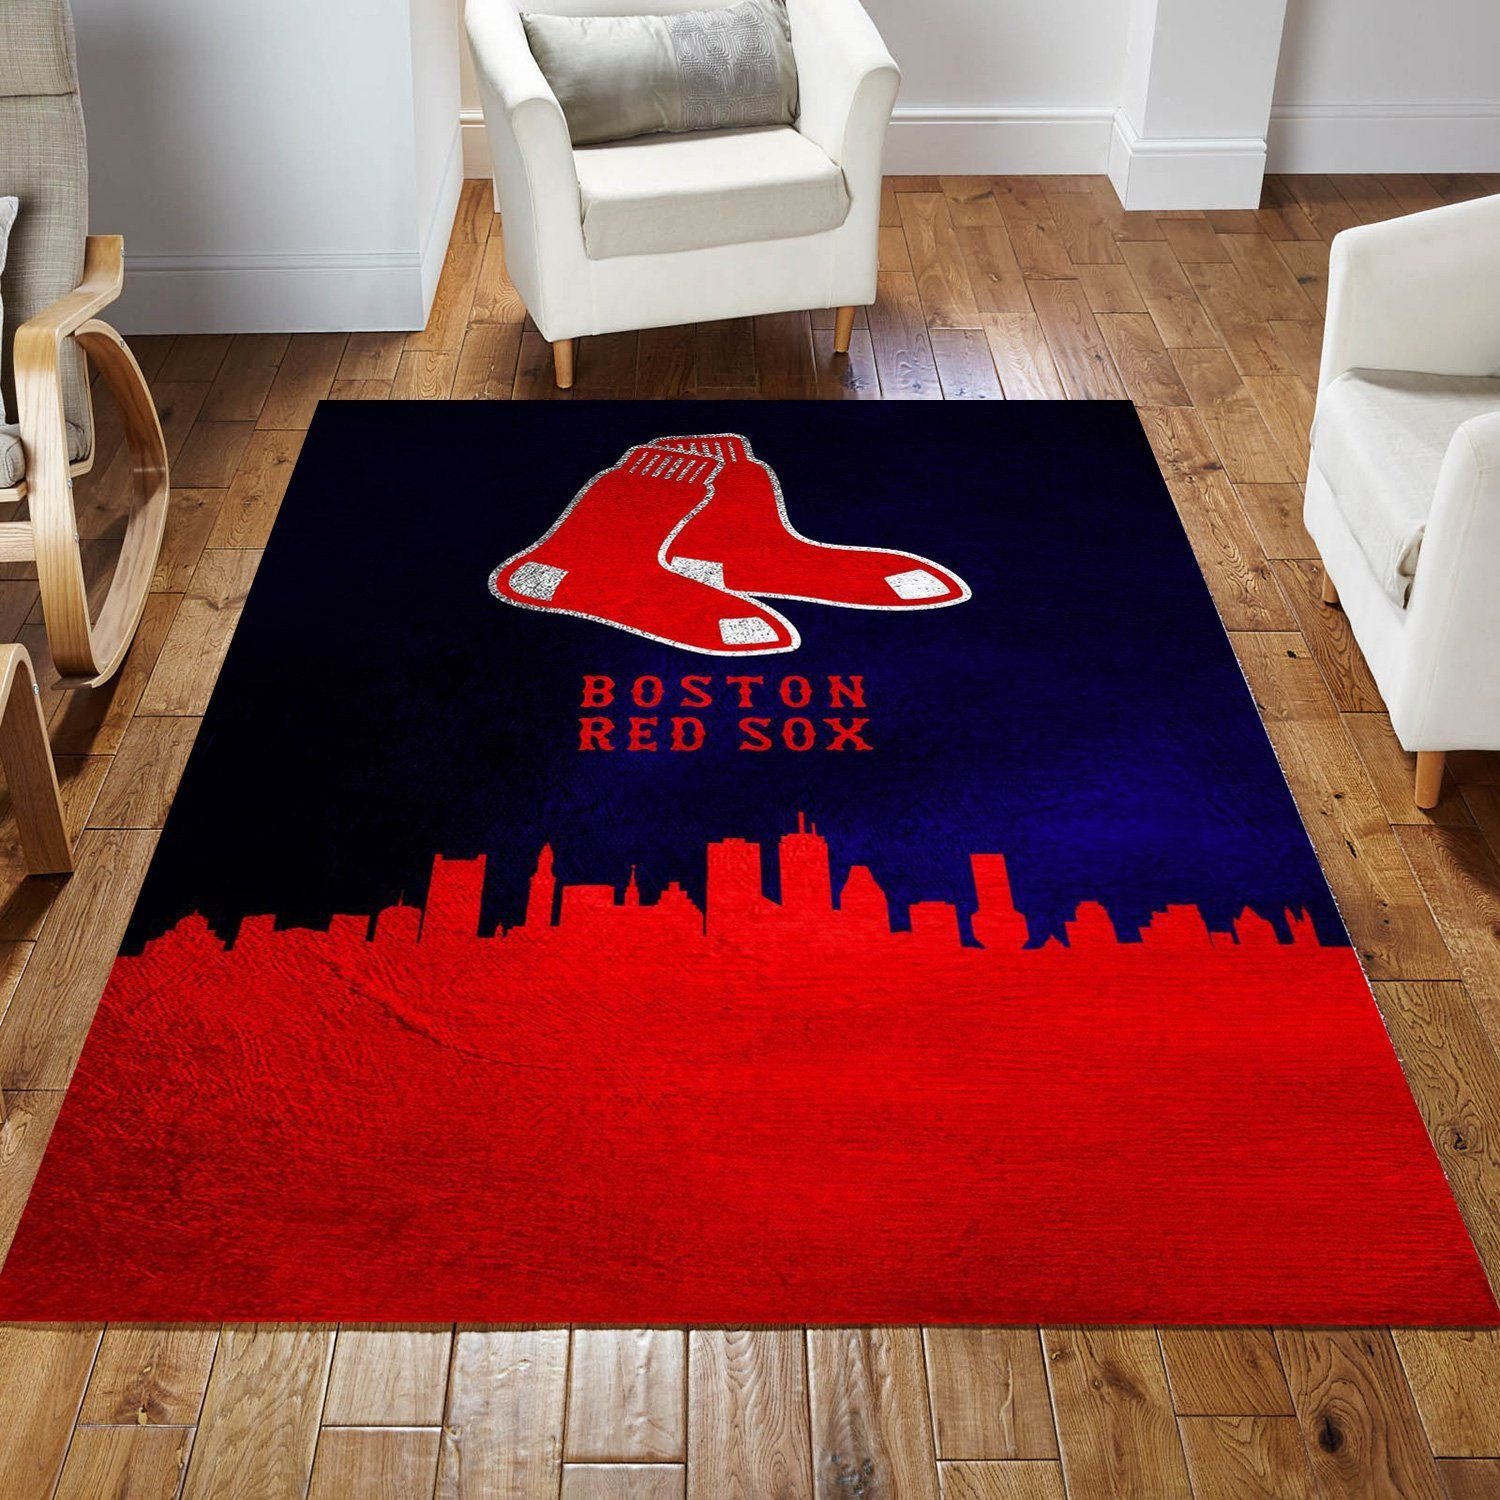 Boston Red Sox Skyline Area Rug For Christmas, Bedroom, Home US Decor - Indoor Outdoor Rugs 3